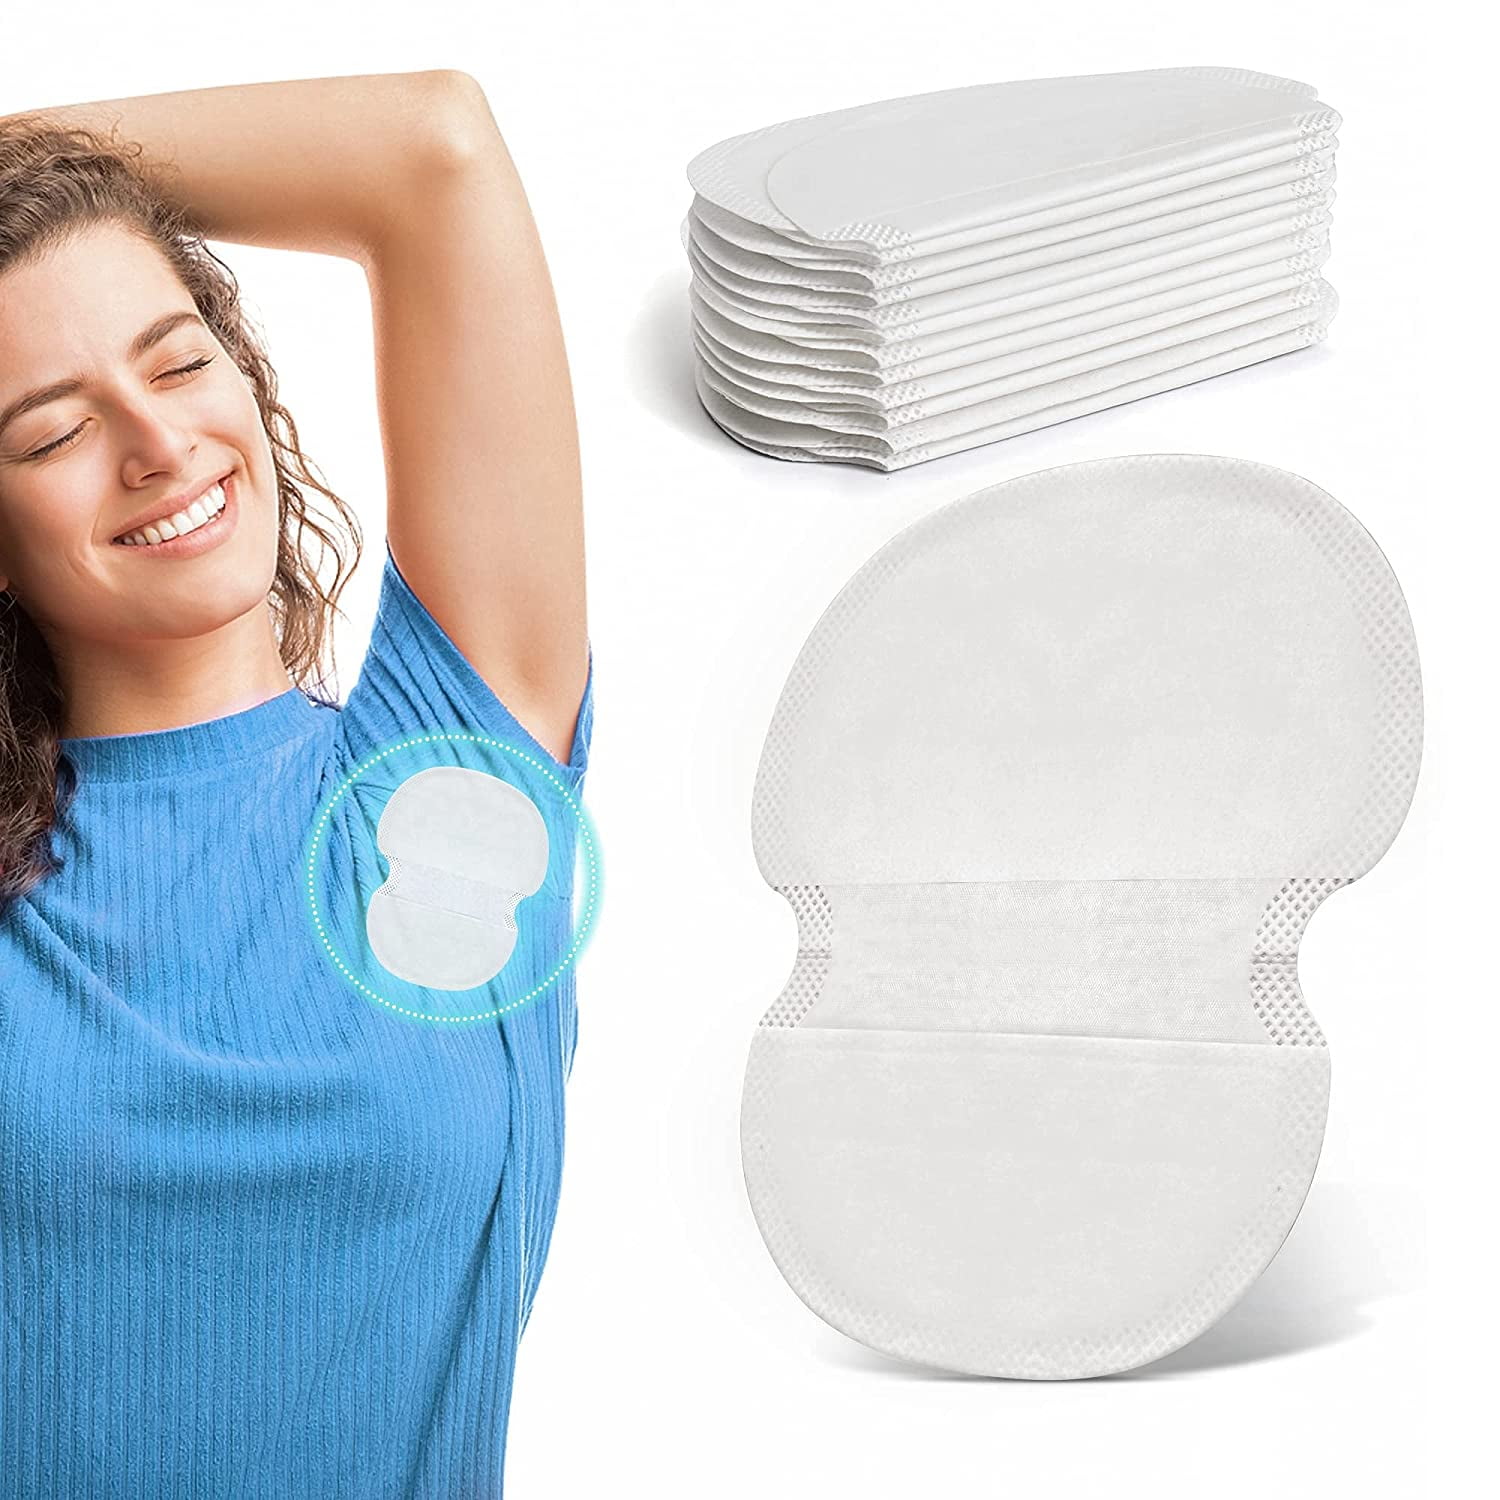 10 SWEAT PADS,DRESS SHIELDS by AXILLA-shield ™ Sweating,body odour,patches 